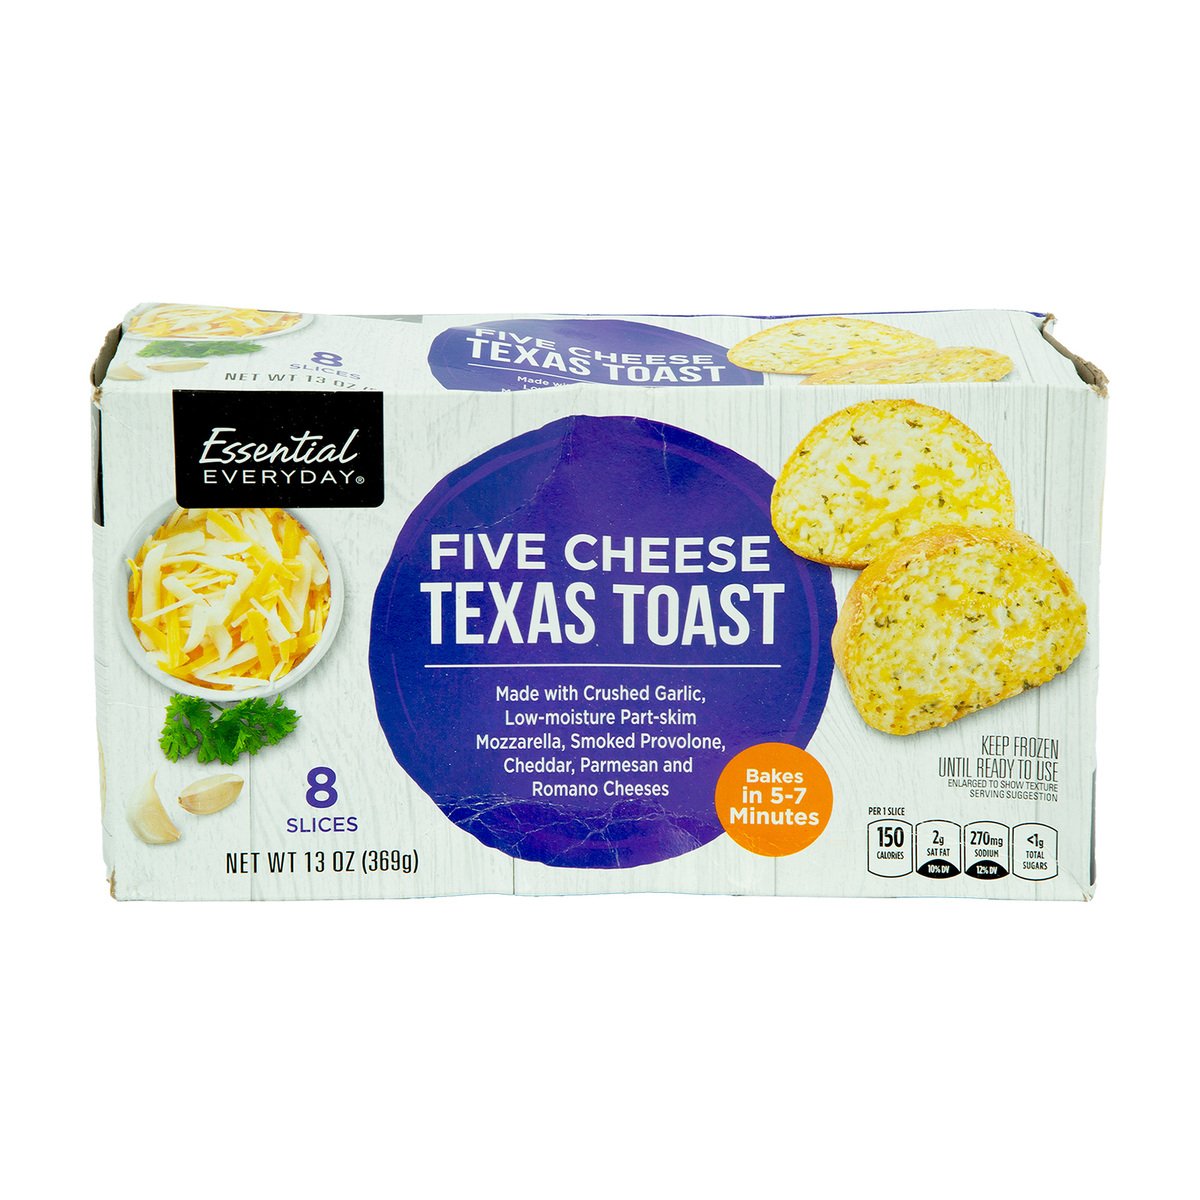 Essential Everyday Five Cheese Texas Toast 8 pcs 369 g